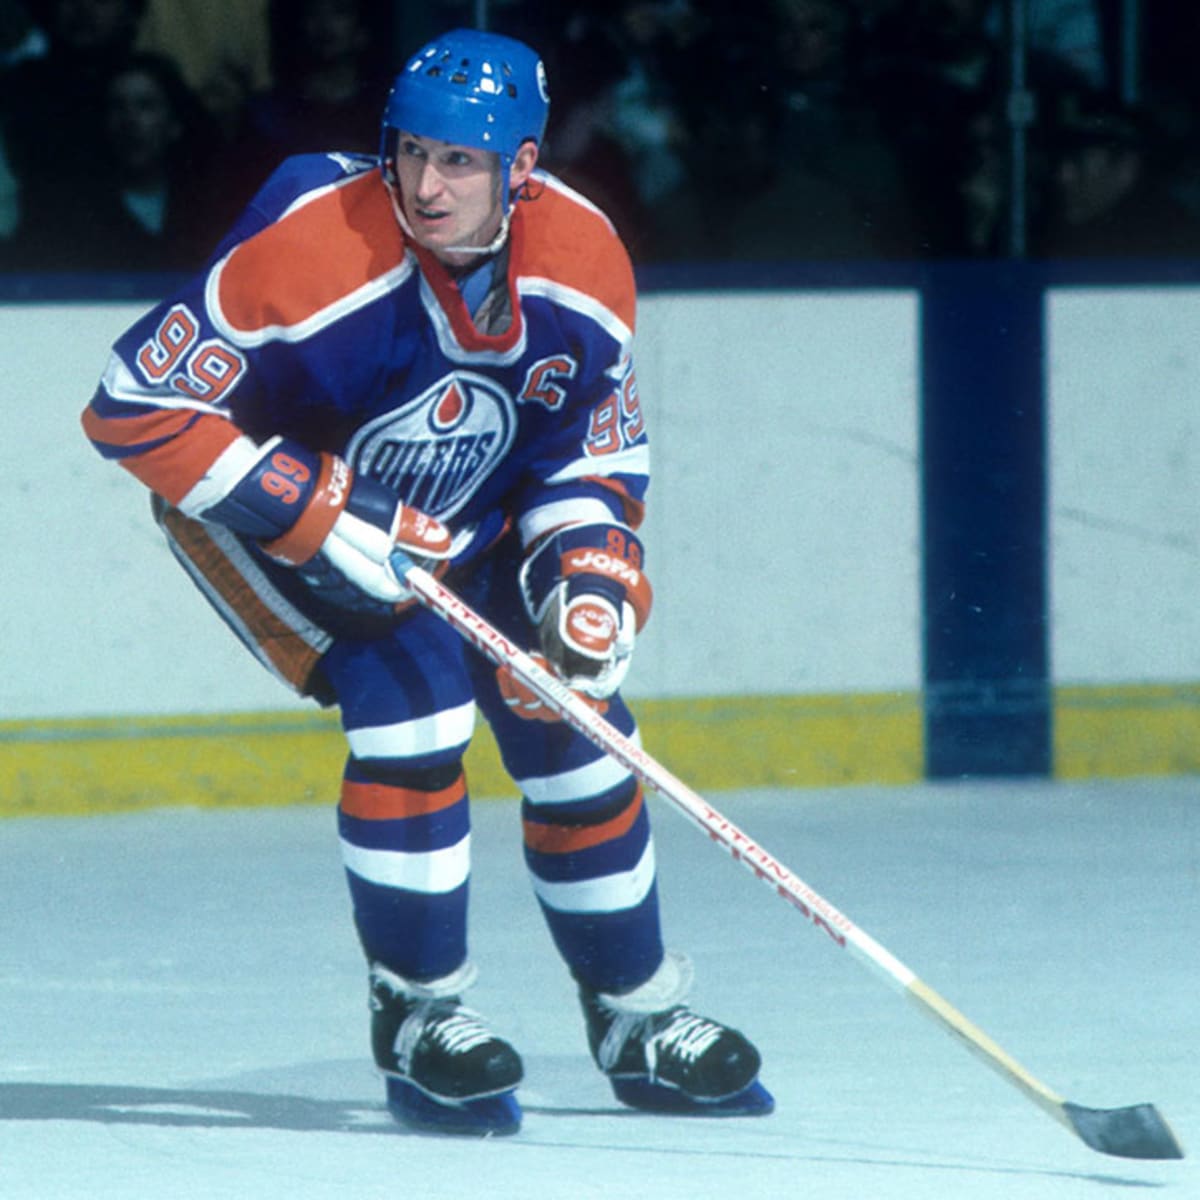 Wayne Gretzky of the Edmonton Oilers on December 16, 1987 at the